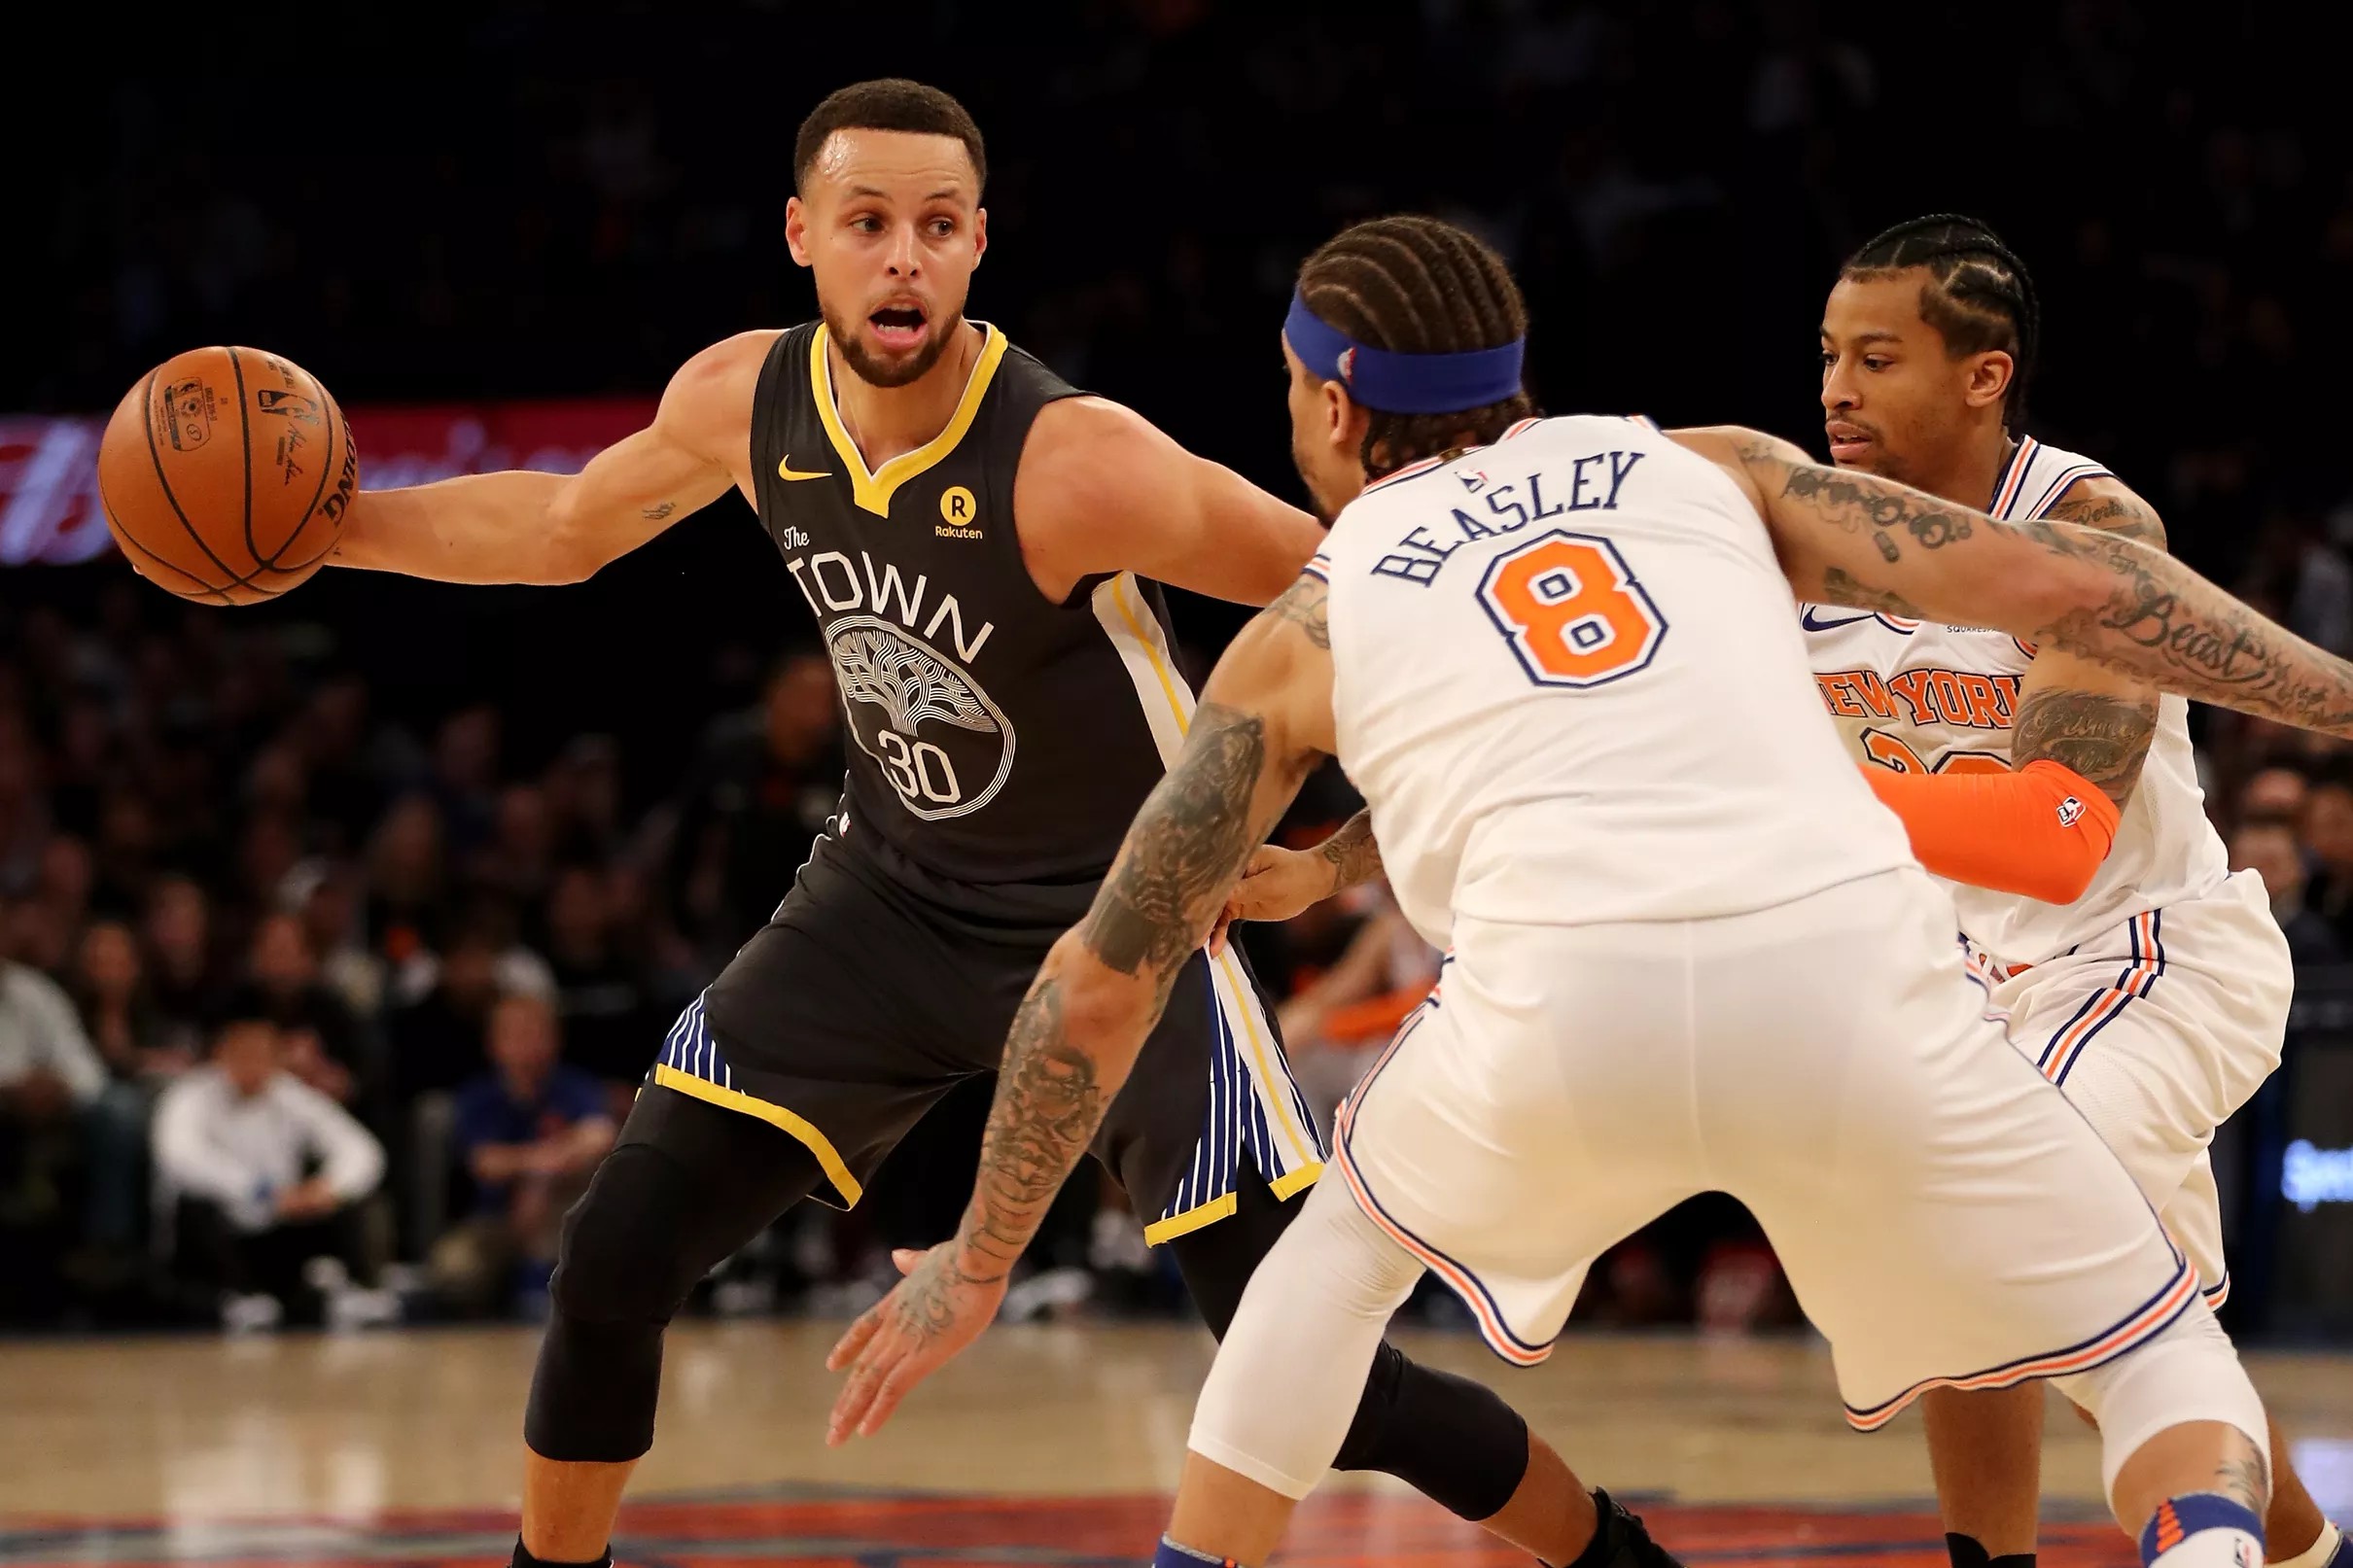 ESPN ranks Steph Curry as the 10thmost influential player in NBA history